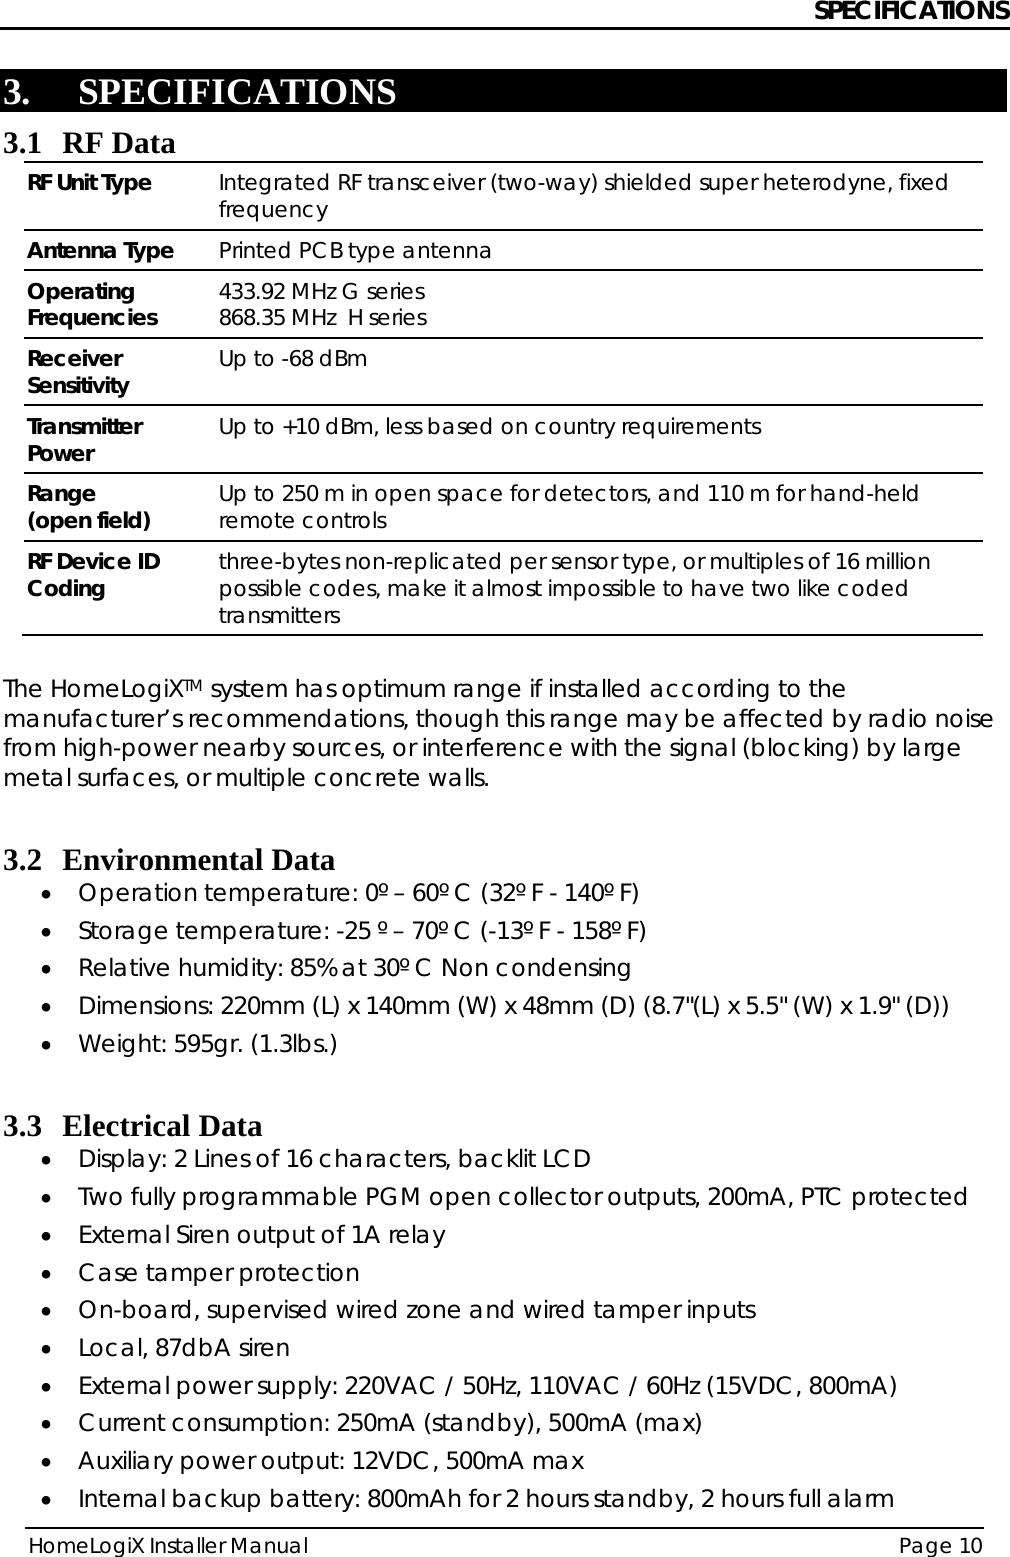 SPECIFICATIONS HomeLogiX Installer Manual  Page 10  3. SPECIFICATIONS 3.1 RF Data RF Unit Type  Integrated RF transceiver (two-way) shielded super heterodyne, fixed frequency Antenna Type  Printed PCB type antenna Operating Frequencies  433.92 MHz G series 868.35 MHz  H series Receiver Sensitivity  Up to -68 dBm Transmitter Power  Up to +10 dBm, less based on country requirements Range  (open field)  Up to 250 m in open space for detectors, and 110 m for hand-held remote controls RF Device ID Coding  three-bytes non-replicated per sensor type, or multiples of 16 million possible codes, make it almost impossible to have two like coded transmitters  The HomeLogiXTM system has optimum range if installed according to the manufacturer’s recommendations, though this range may be affected by radio noise from high-power nearby sources, or interference with the signal (blocking) by large metal surfaces, or multiple concrete walls.  3.2 Environmental Data • Operation temperature: 0º – 60º C (32º F - 140º F) • Storage temperature: -25 º – 70º C (-13º F - 158º F) • Relative humidity: 85% at 30º C Non condensing • Dimensions: 220mm (L) x 140mm (W) x 48mm (D) (8.7&quot;(L) x 5.5&quot; (W) x 1.9&quot; (D)) • Weight: 595gr. (1.3lbs.)  3.3 Electrical Data • Display: 2 Lines of 16 characters, backlit LCD • Two fully programmable PGM open collector outputs, 200mA, PTC protected • External Siren output of 1A relay • Case tamper protection • On-board, supervised wired zone and wired tamper inputs • Local, 87dbA siren • External power supply: 220VAC / 50Hz, 110VAC / 60Hz (15VDC, 800mA)  • Current consumption: 250mA (standby), 500mA (max)  • Auxiliary power output: 12VDC, 500mA max • Internal backup battery: 800mAh for 2 hours standby, 2 hours full alarm 